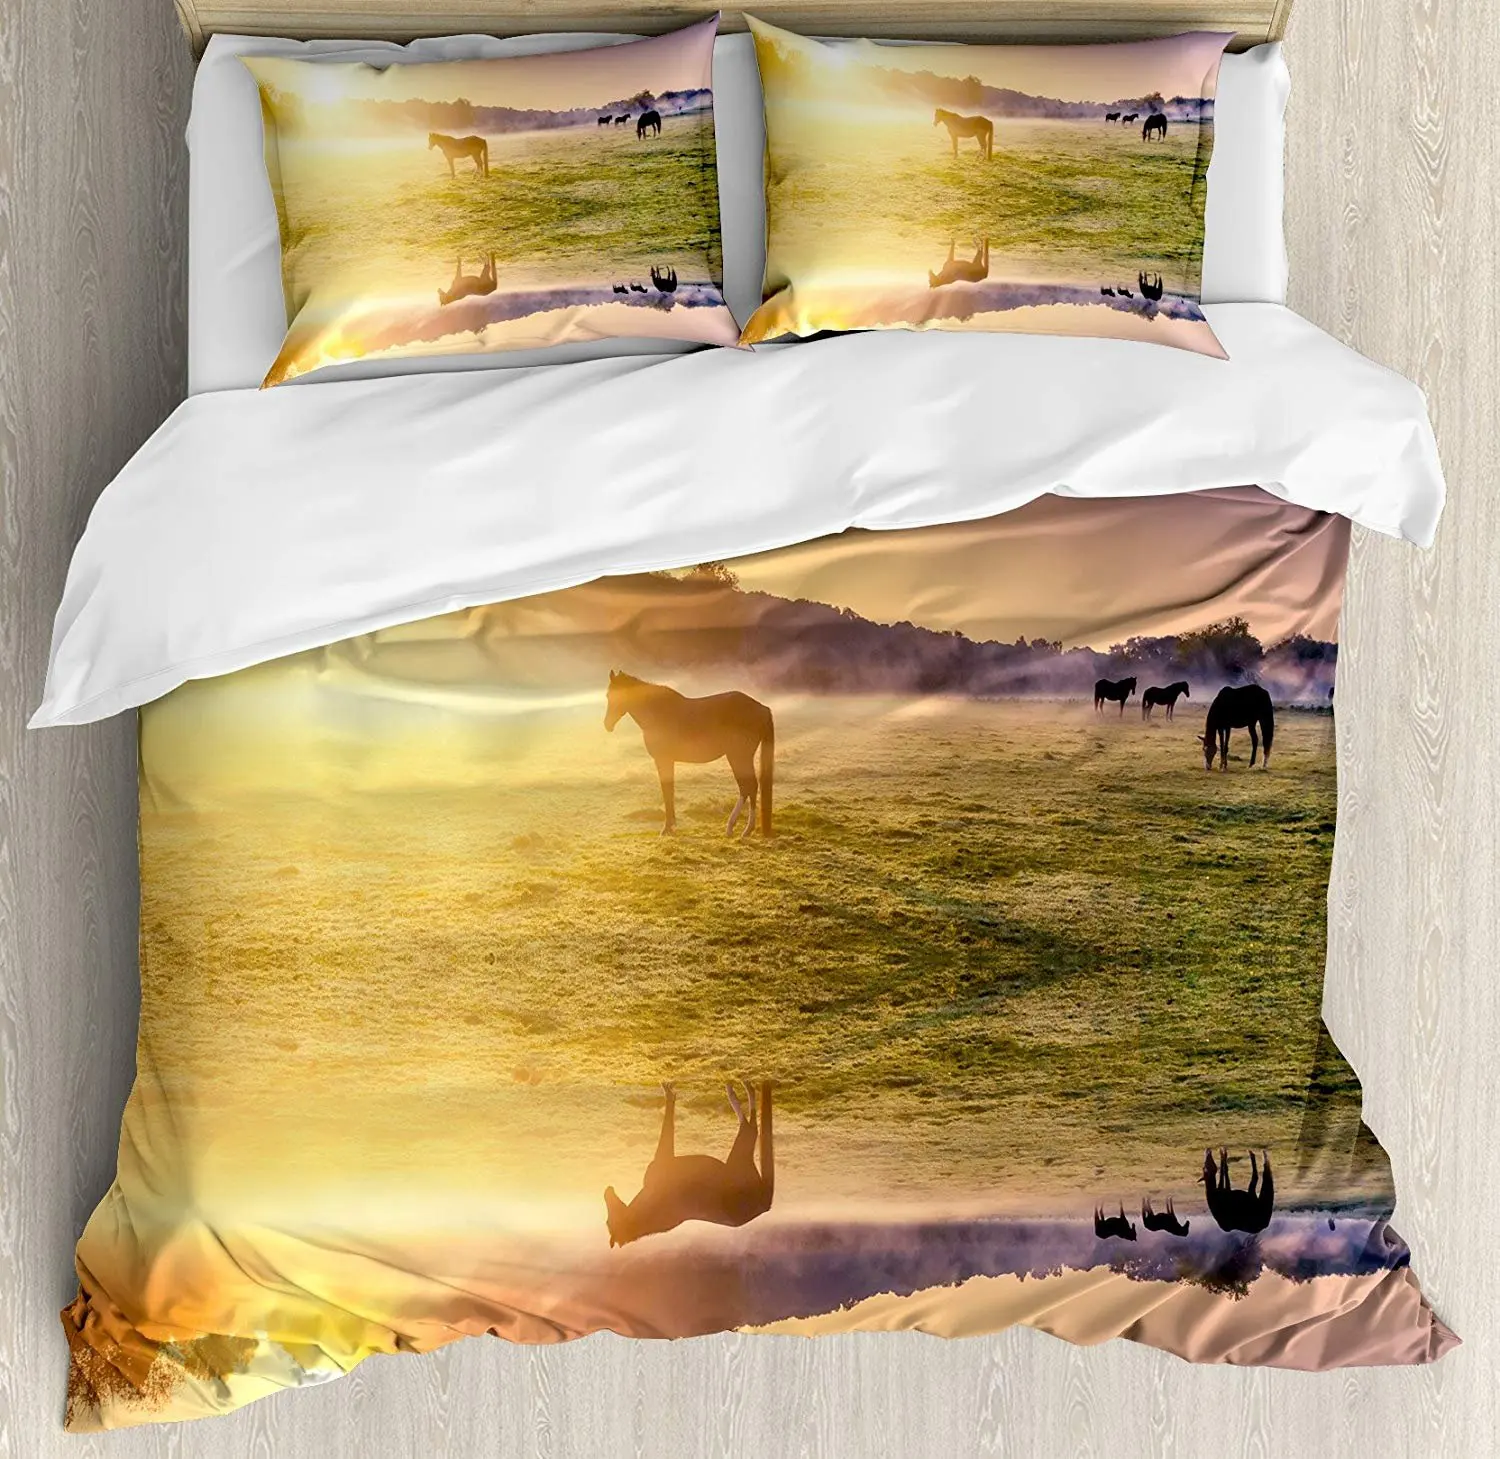 

Nature Bedding Set Horse Valley in South with a Lake Reflection and Sun Rising Above Mountains Print Duvet Cover Pillowcase